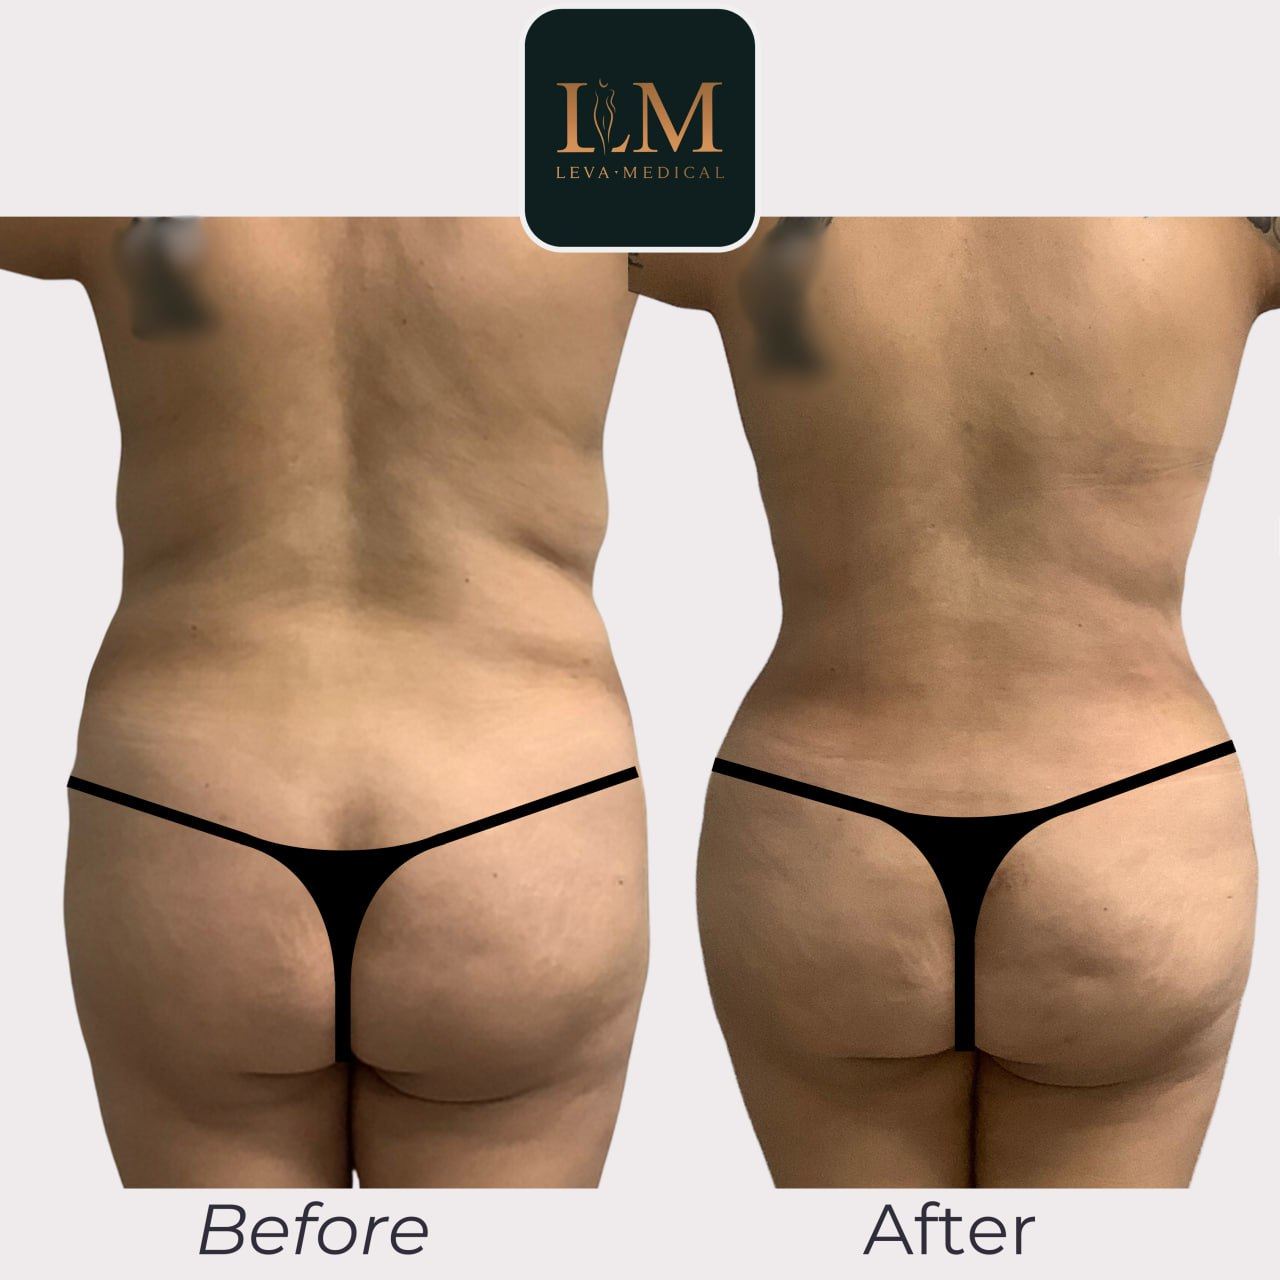 Before and after photos of liposculpture